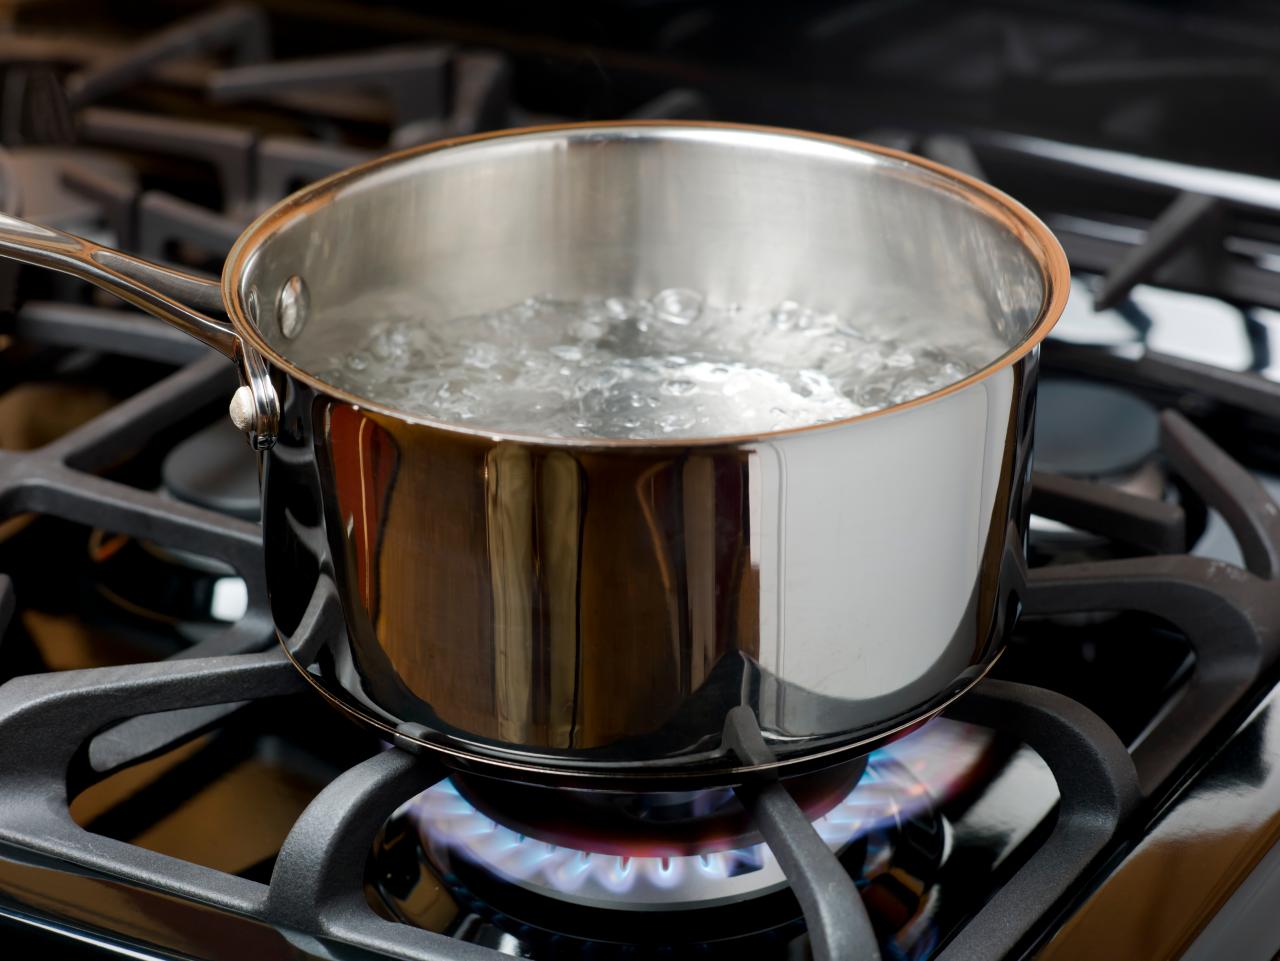 What is a Rolling Boil, Bring a Pot of Water to A Rolling Boil